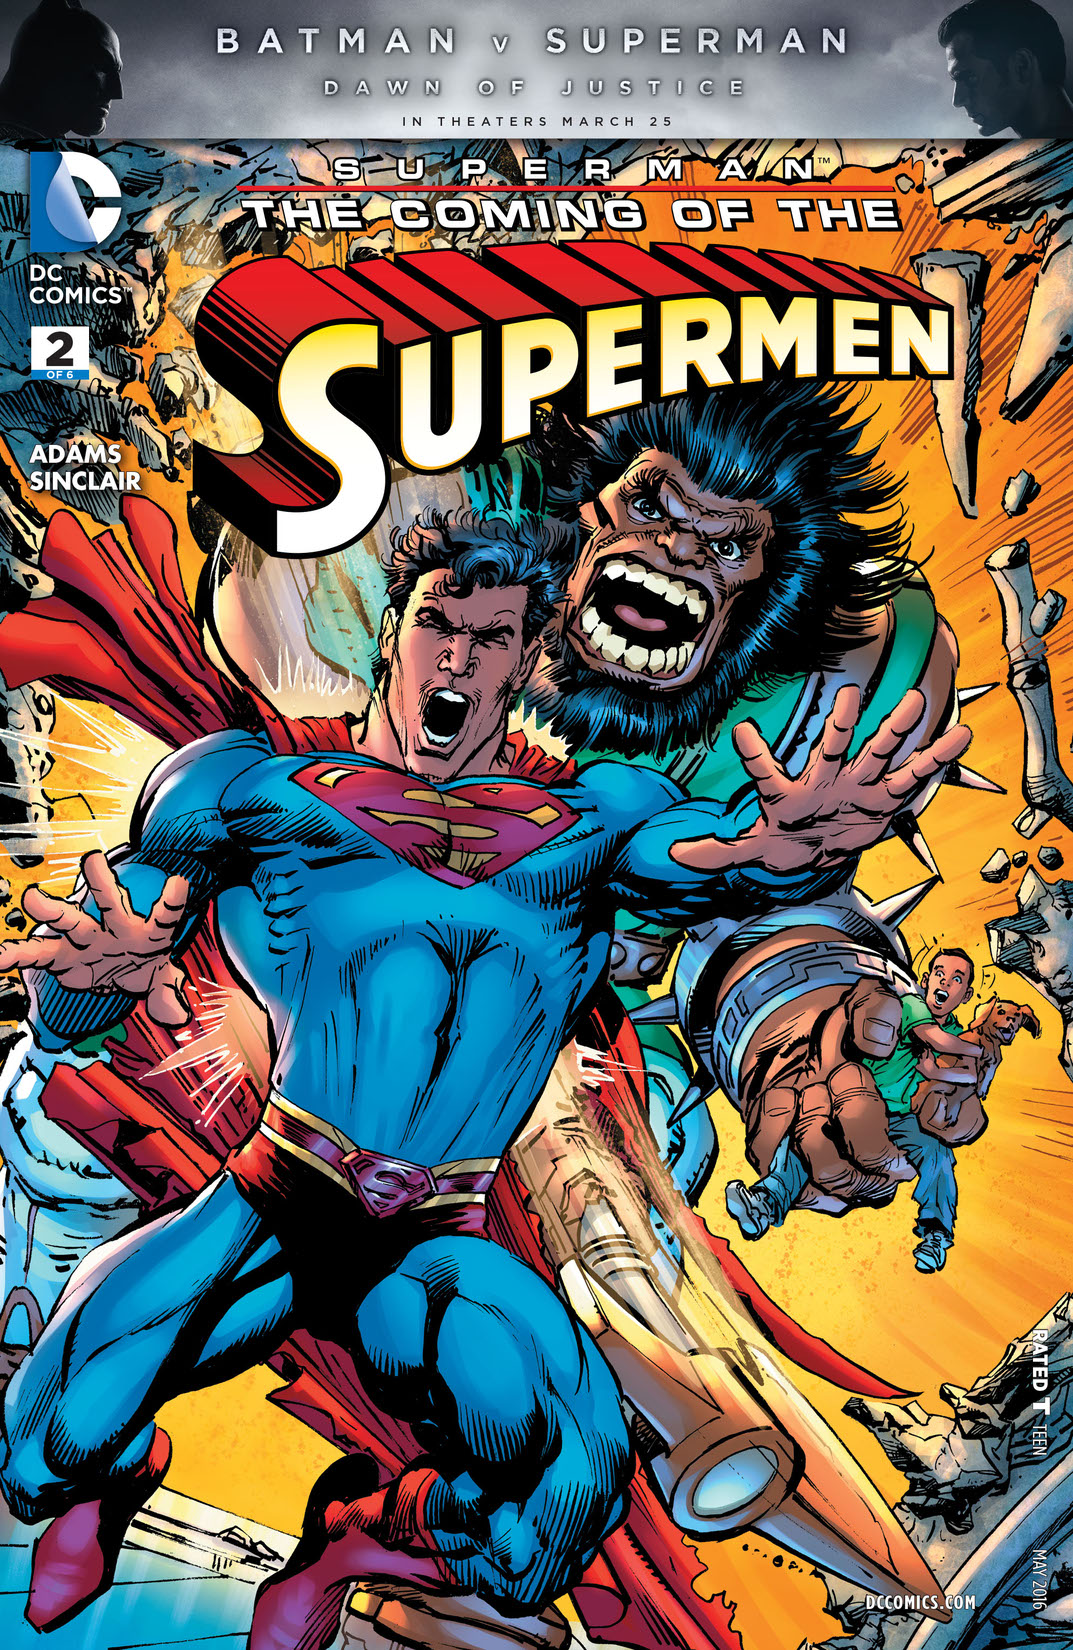 Superman: The Coming of the Supermen #2 preview images